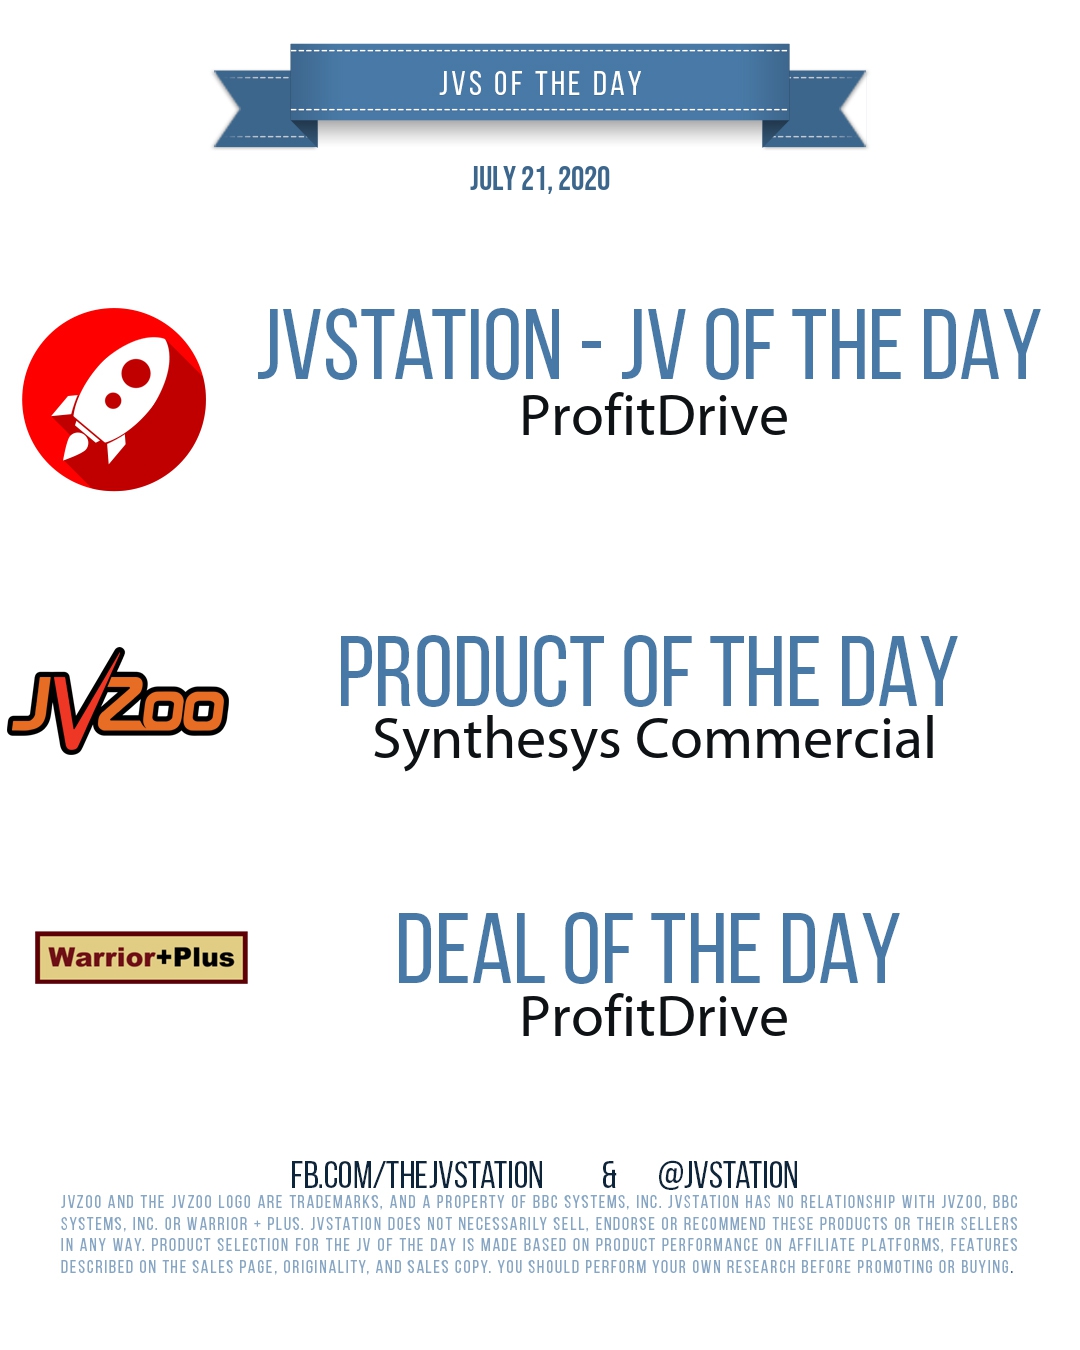 JVs of the day - July 21, 2020